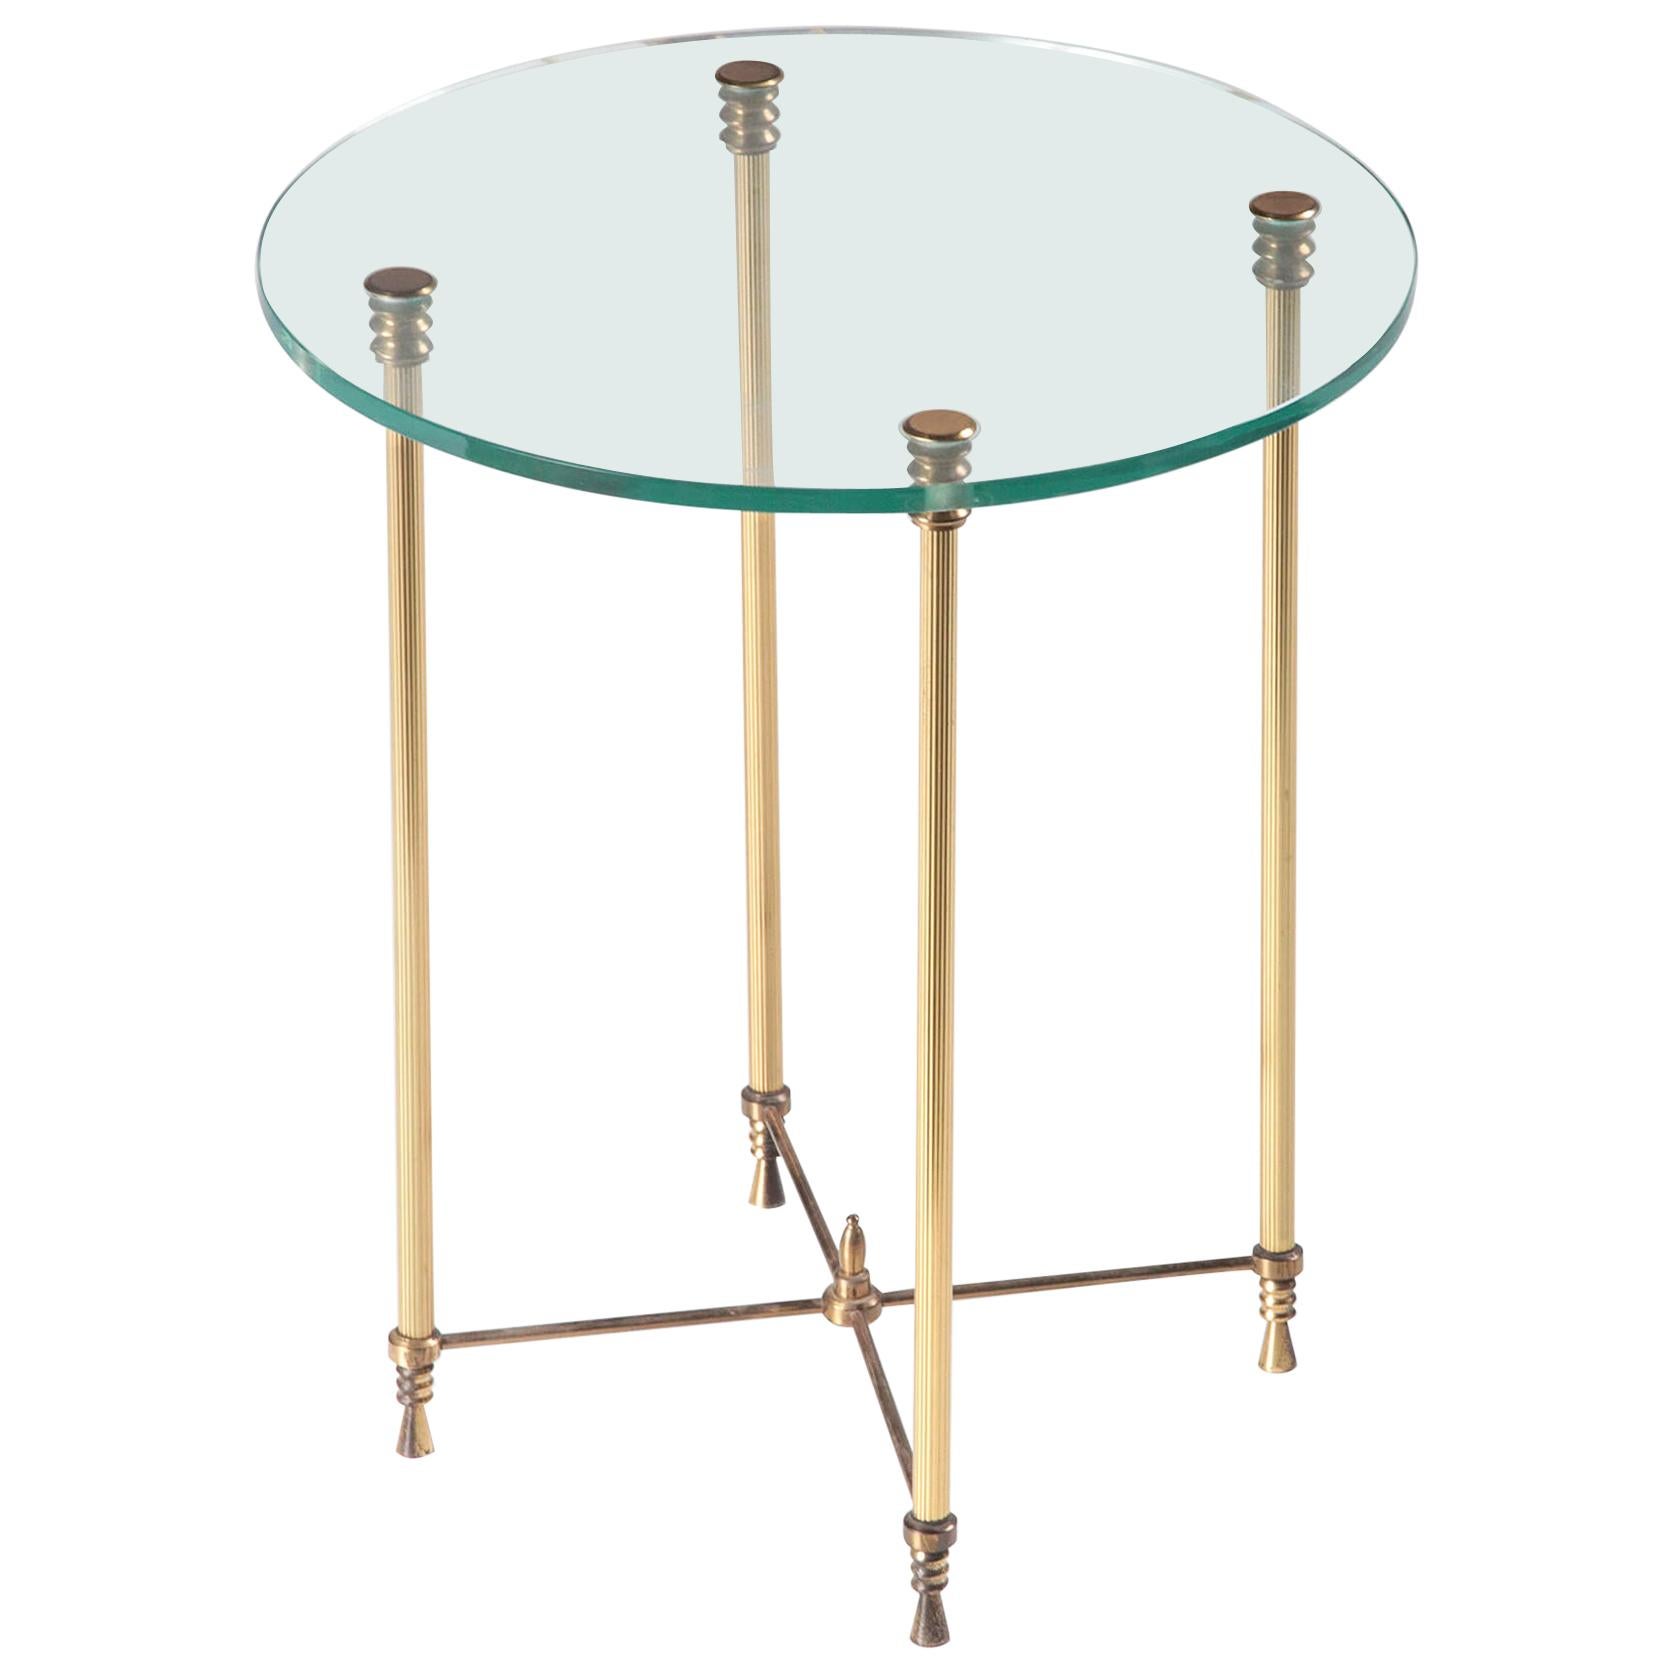 Mid-20th Century Hollywood Regency Sidetable, Glass and Copper